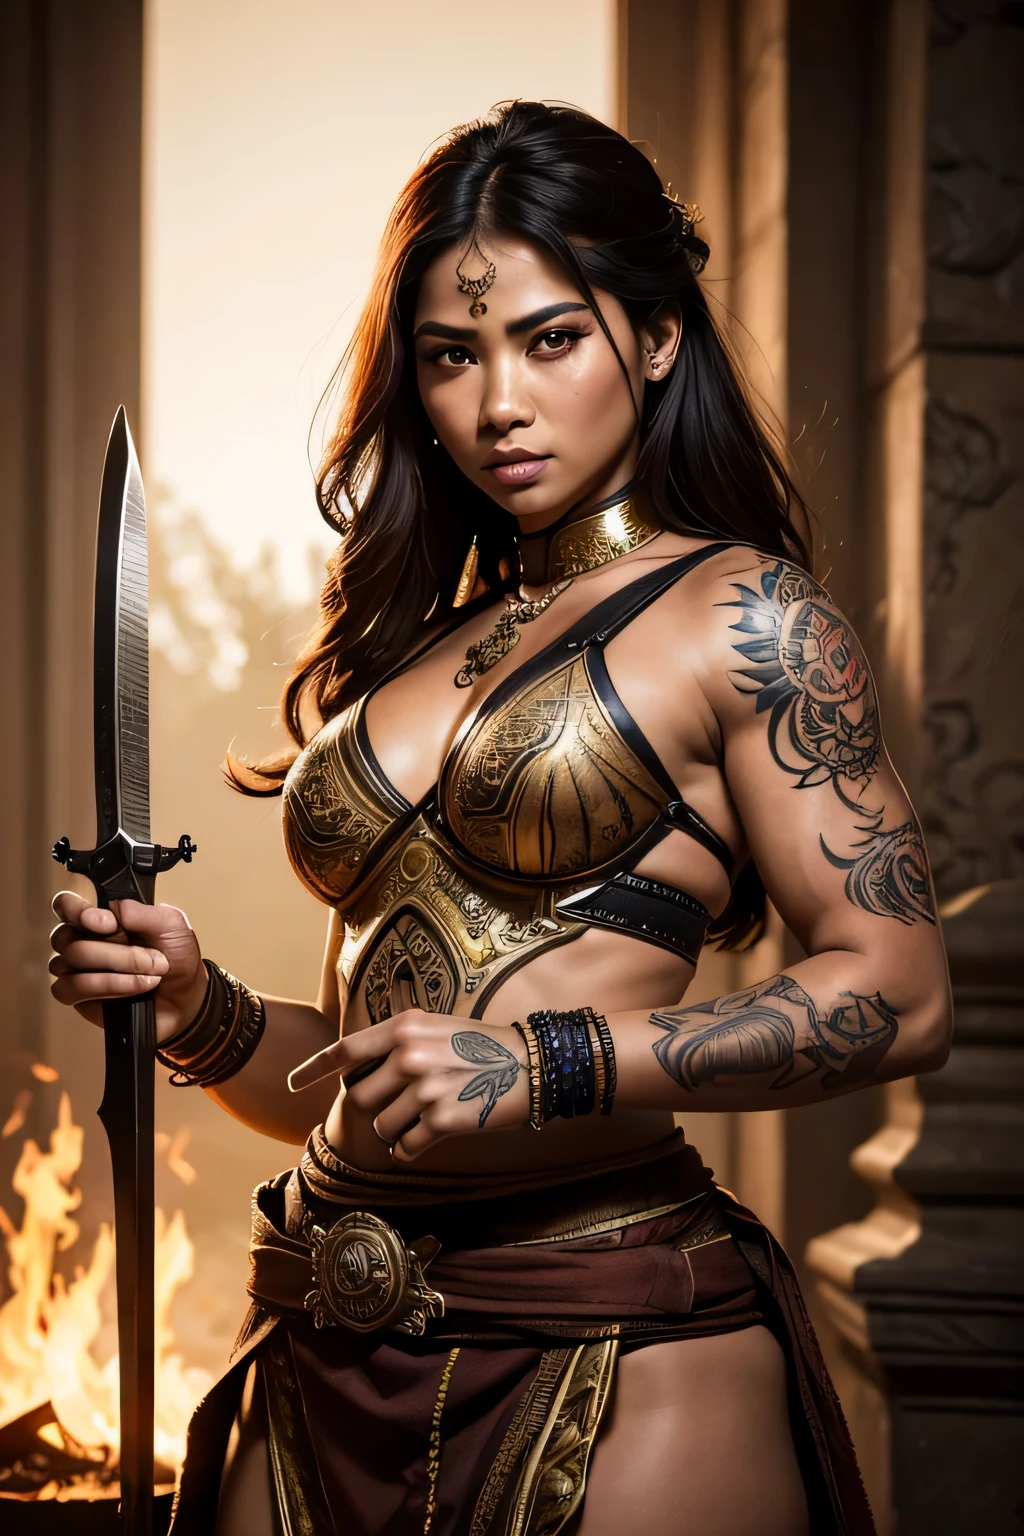 (best quality,4k,8k,highres,masterpiece:1.2),ultra-detailed,(realistic,photorealistic,photo-realistic:1.37),Indonesian Woman warrior in war,strong,brave,defensive,agile,stellar,beautiful detailed eyes,beautiful detailed lips,extremely detailed eyes and face,long eyelashes,elaborate traditional warrior attire,chiseled muscles,holding a sharp bladed weapon,covered in intricate tattoos,determinated expression,sunset lighting,with fire blazing in the background,artistic digital painting,dominant warm colors,contrasting light and shadows.